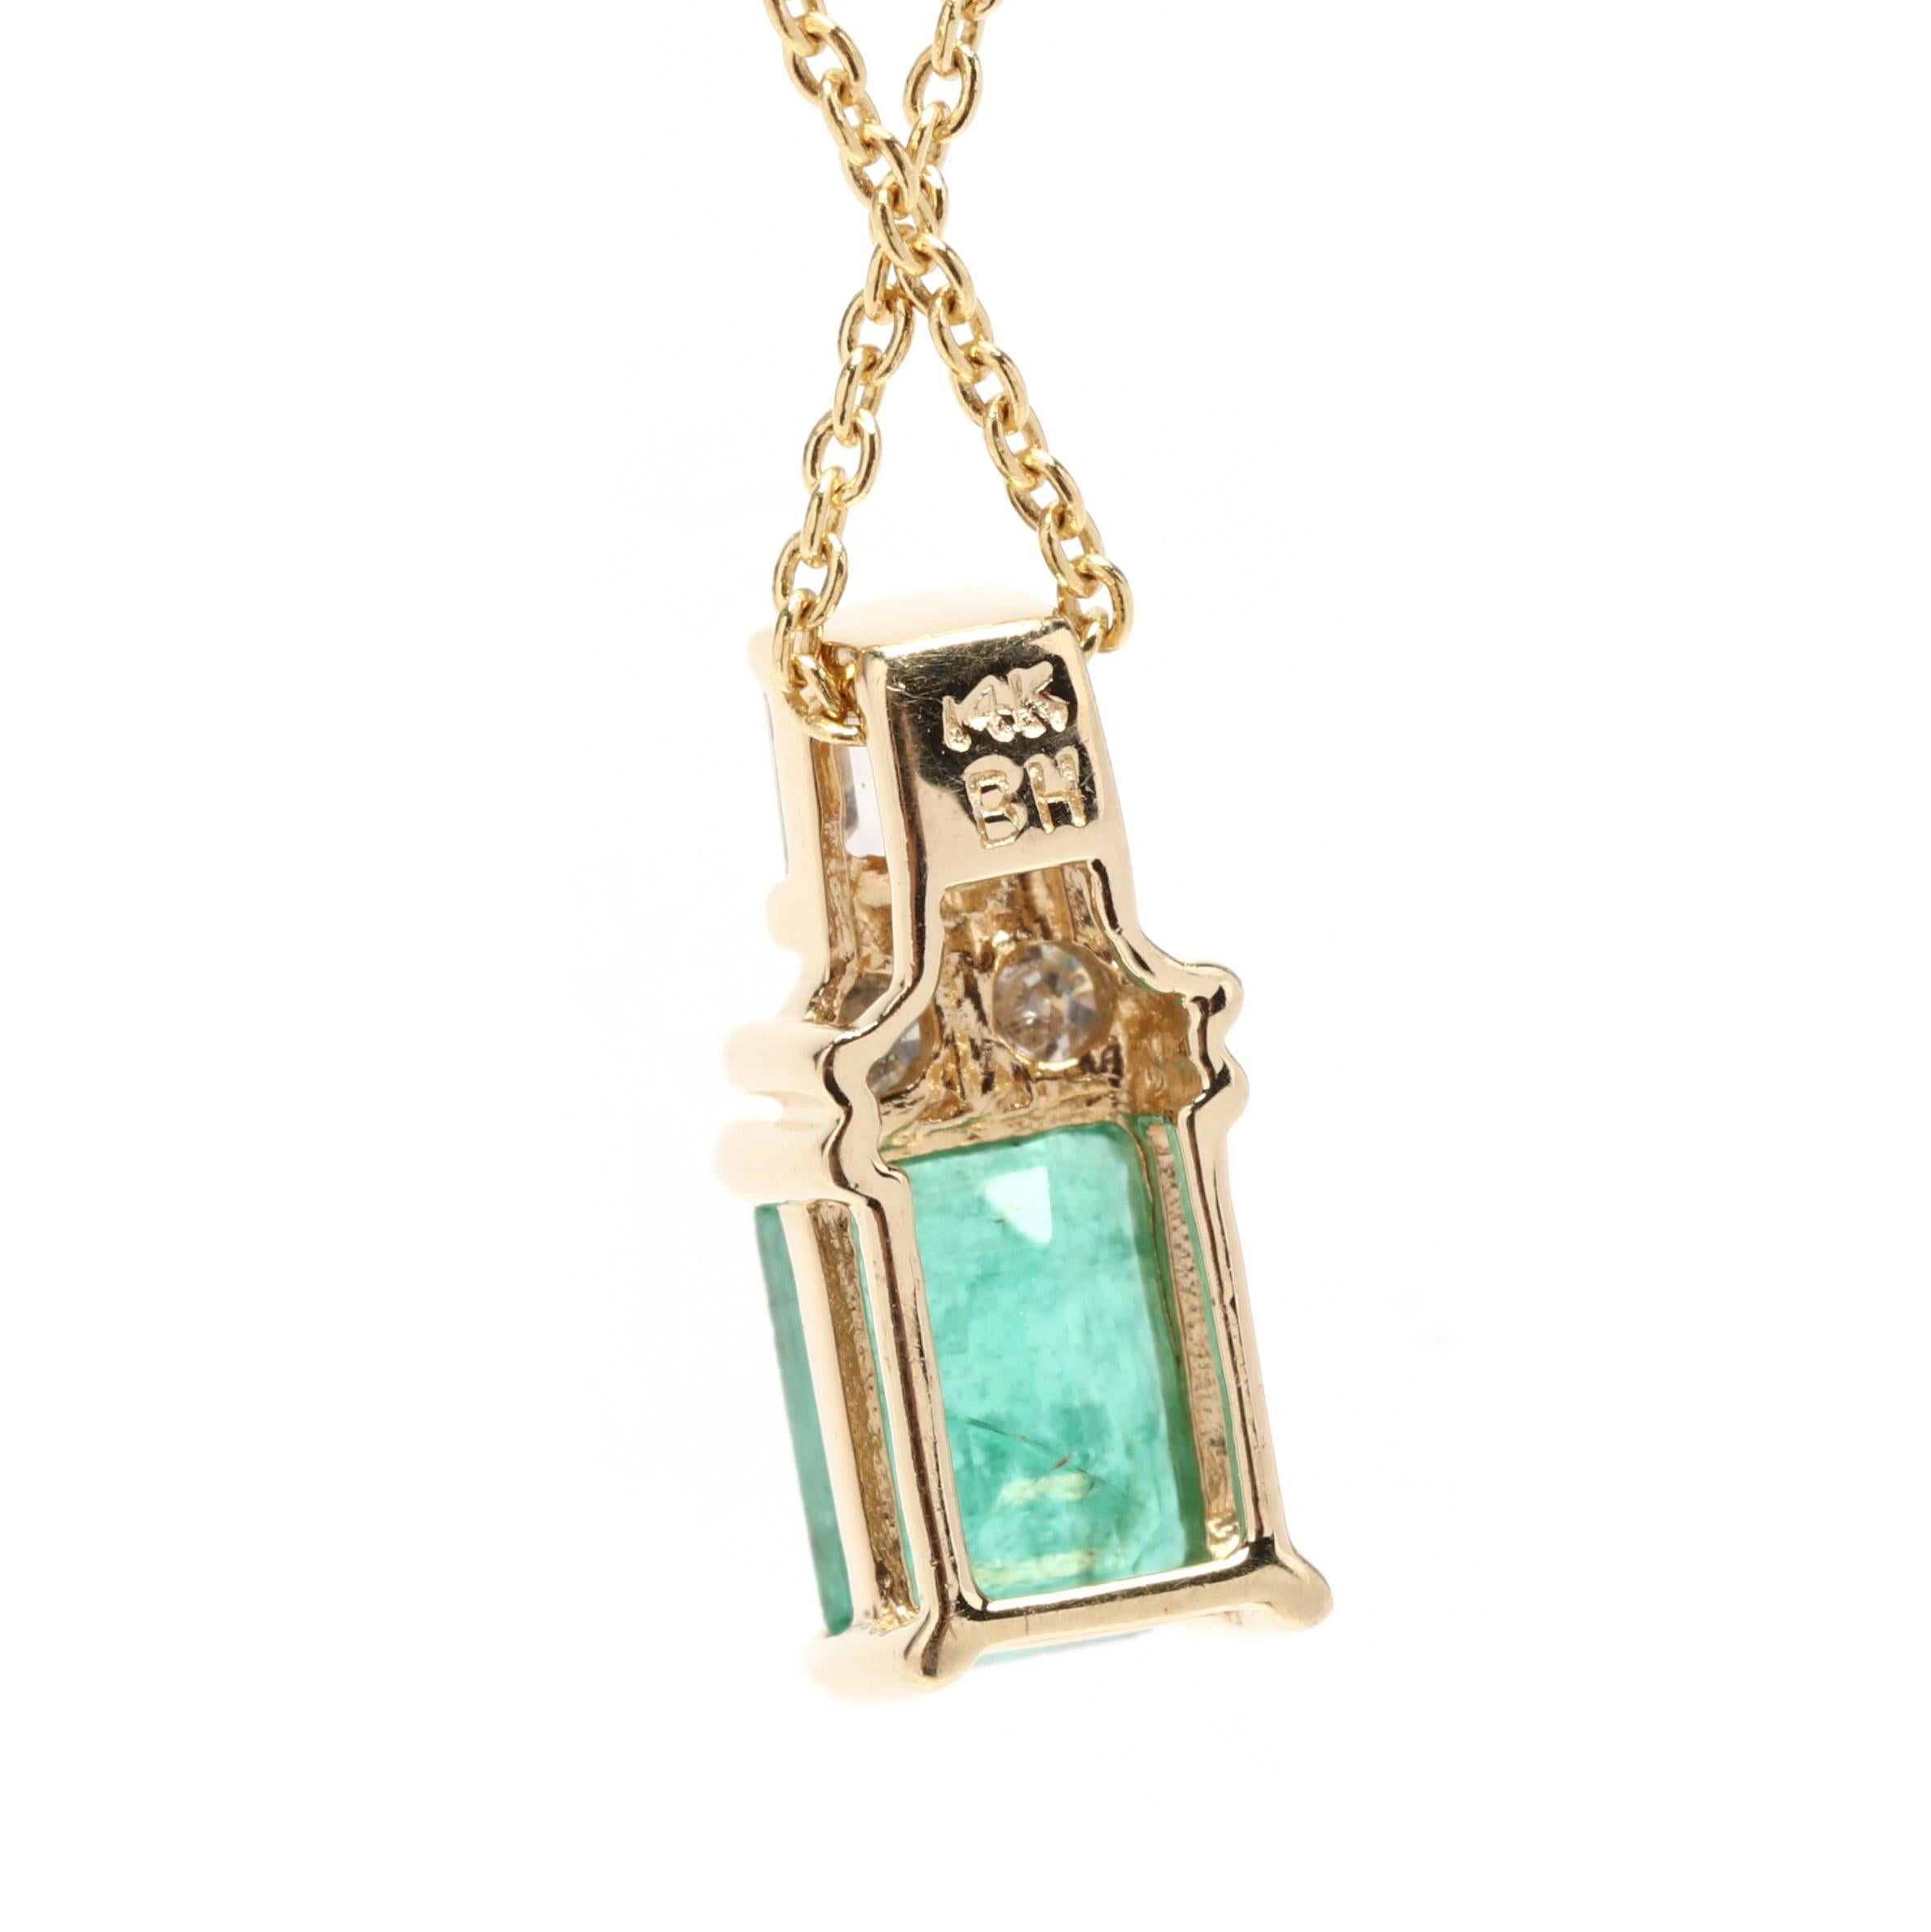 A vintage 14 karat yellow gold emerald and diamond pendant necklace. This May birthstone necklace features a prong set, emerald cut emerald weighing approximately 1 carat with a cluster of baguette and round brilliant cut diamonds set above weighing